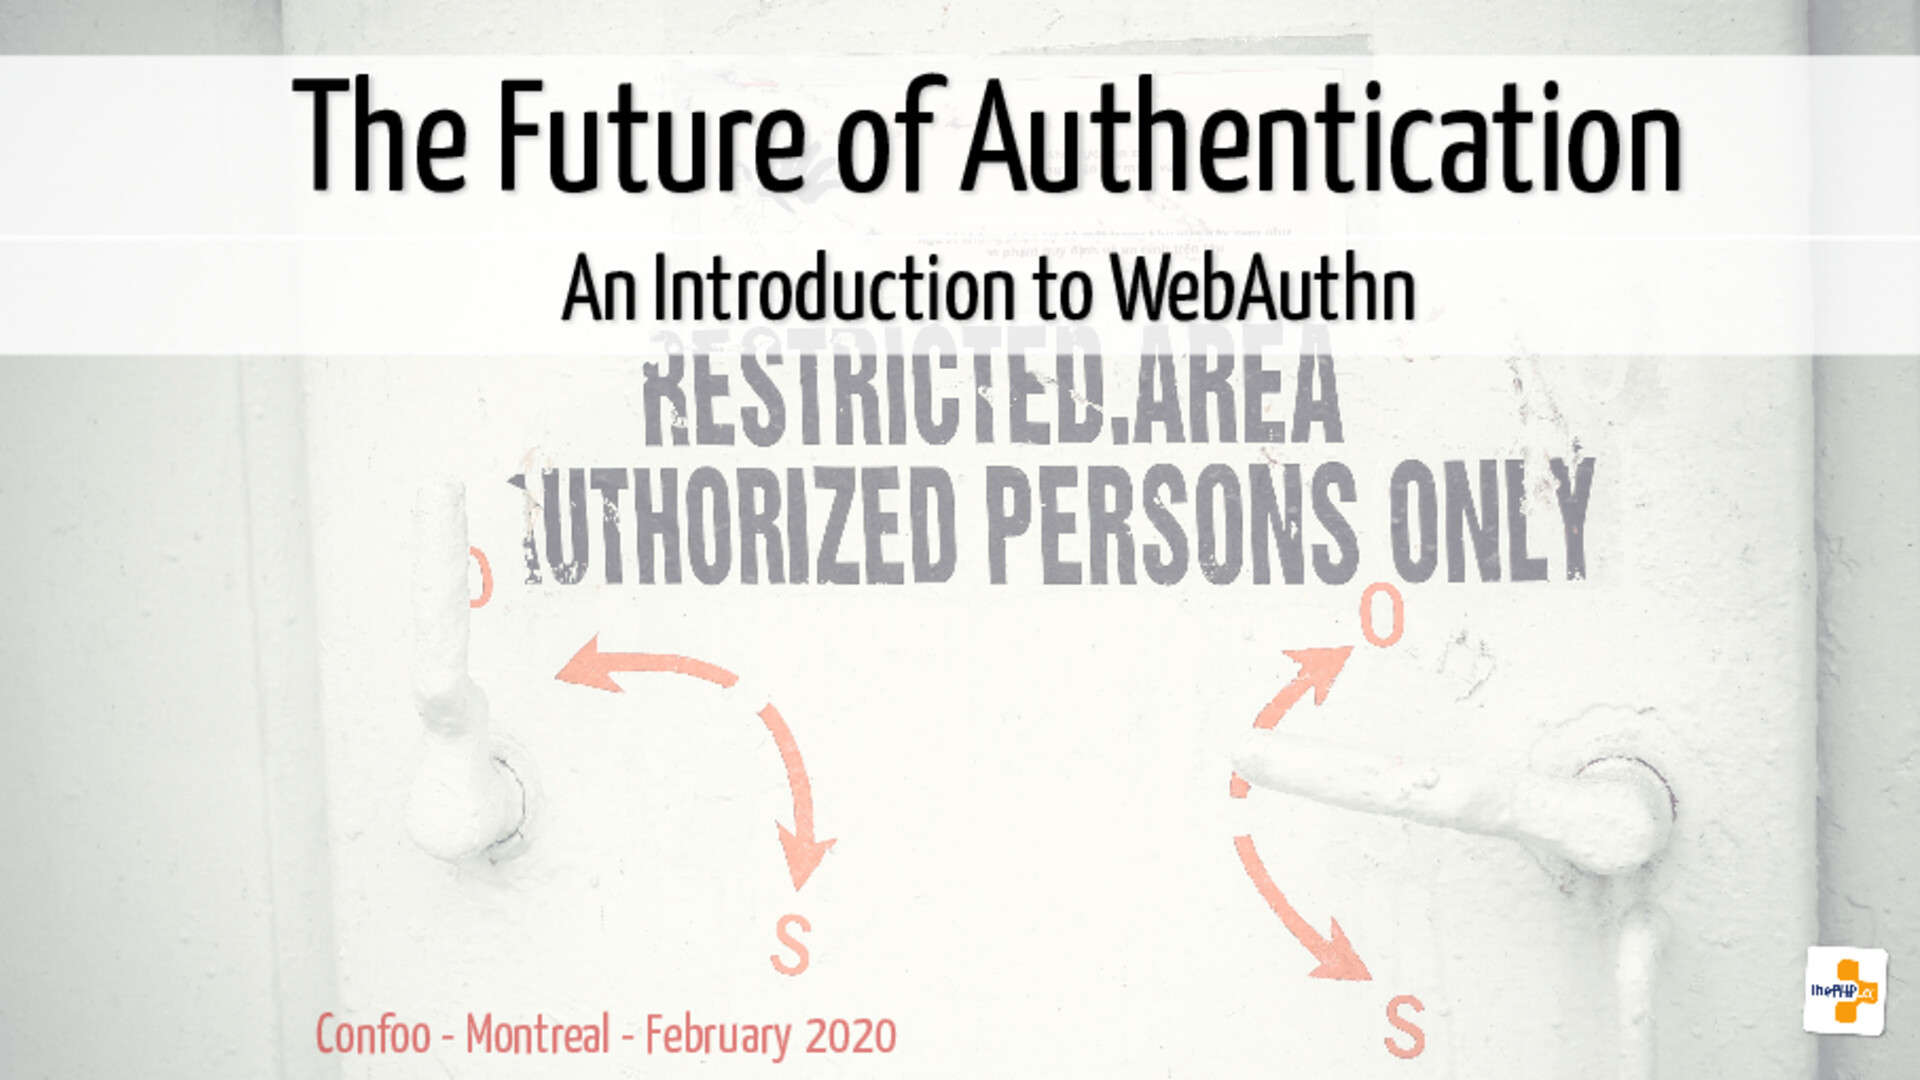 The Future of Authentication: An Introduction to WebAuthn